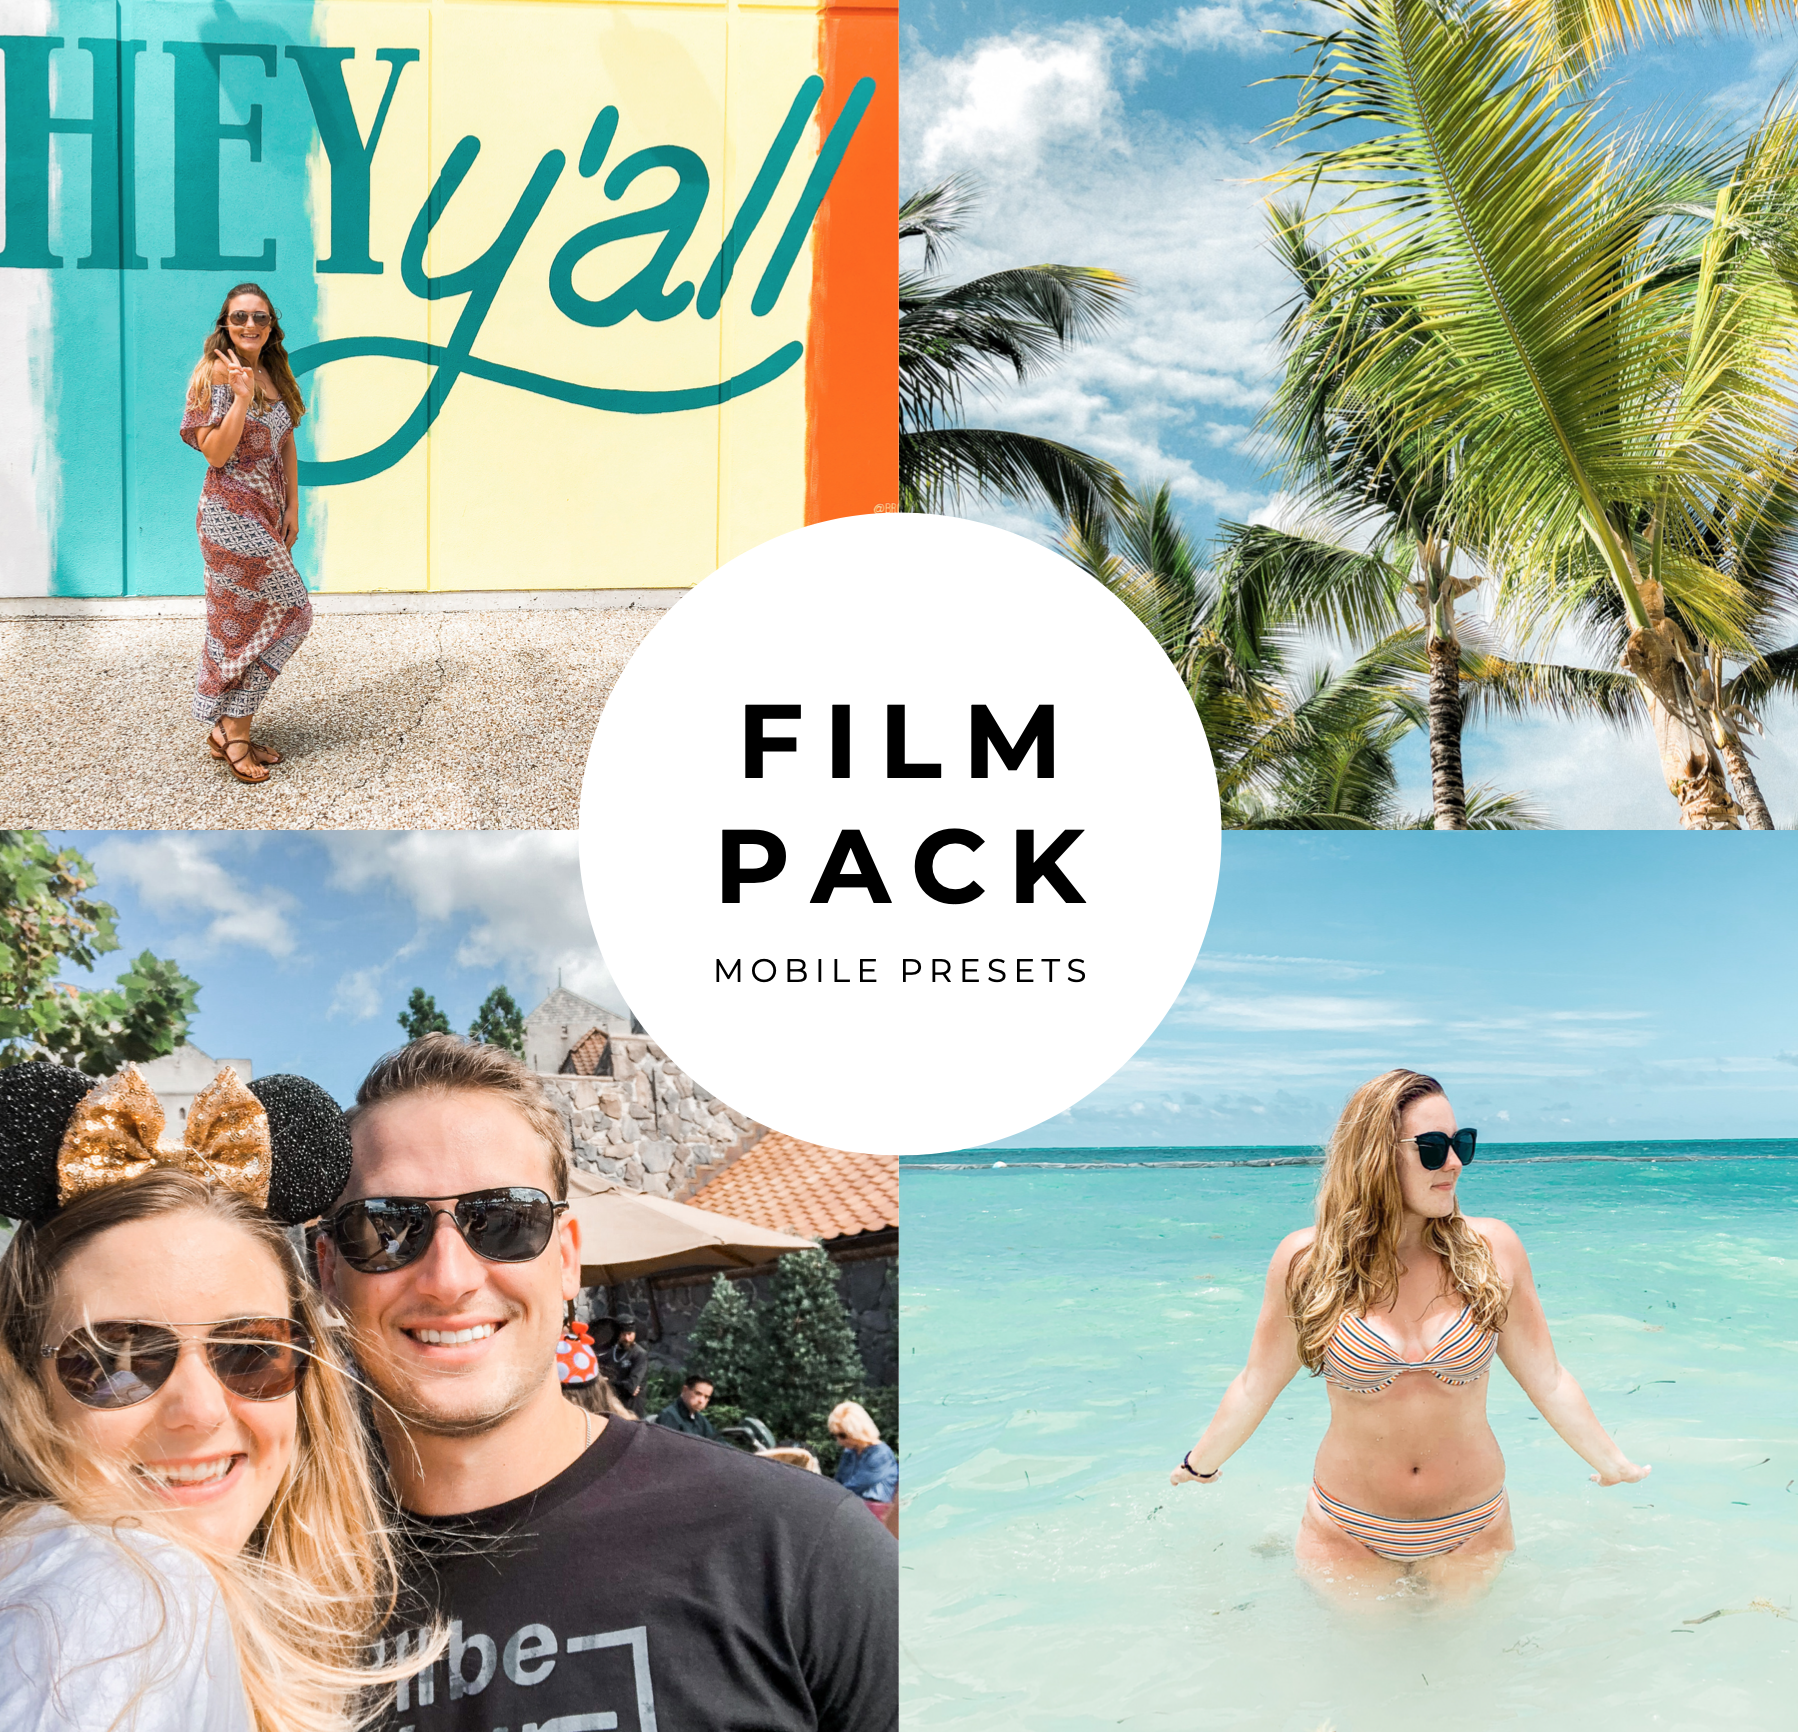 Mobile Presets for Bloggers Travel Lifestyle Film Inspired Prism Presets 1.png